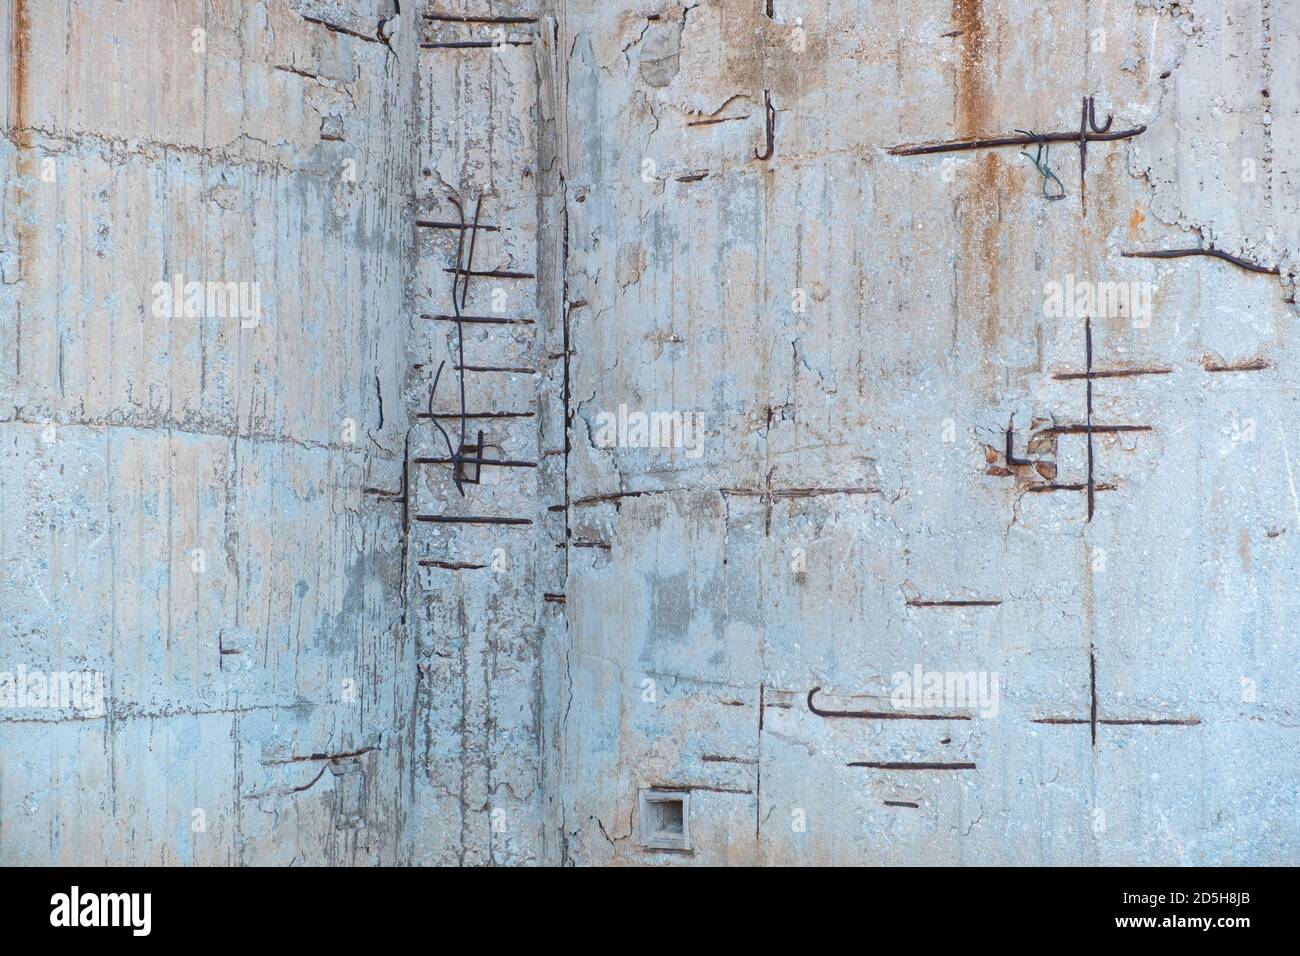 Reinforced concrete with damaged and rusty steel reinforcement. Old distressed wall texture background, steel bars and mesh visible corrosion Stock Photo